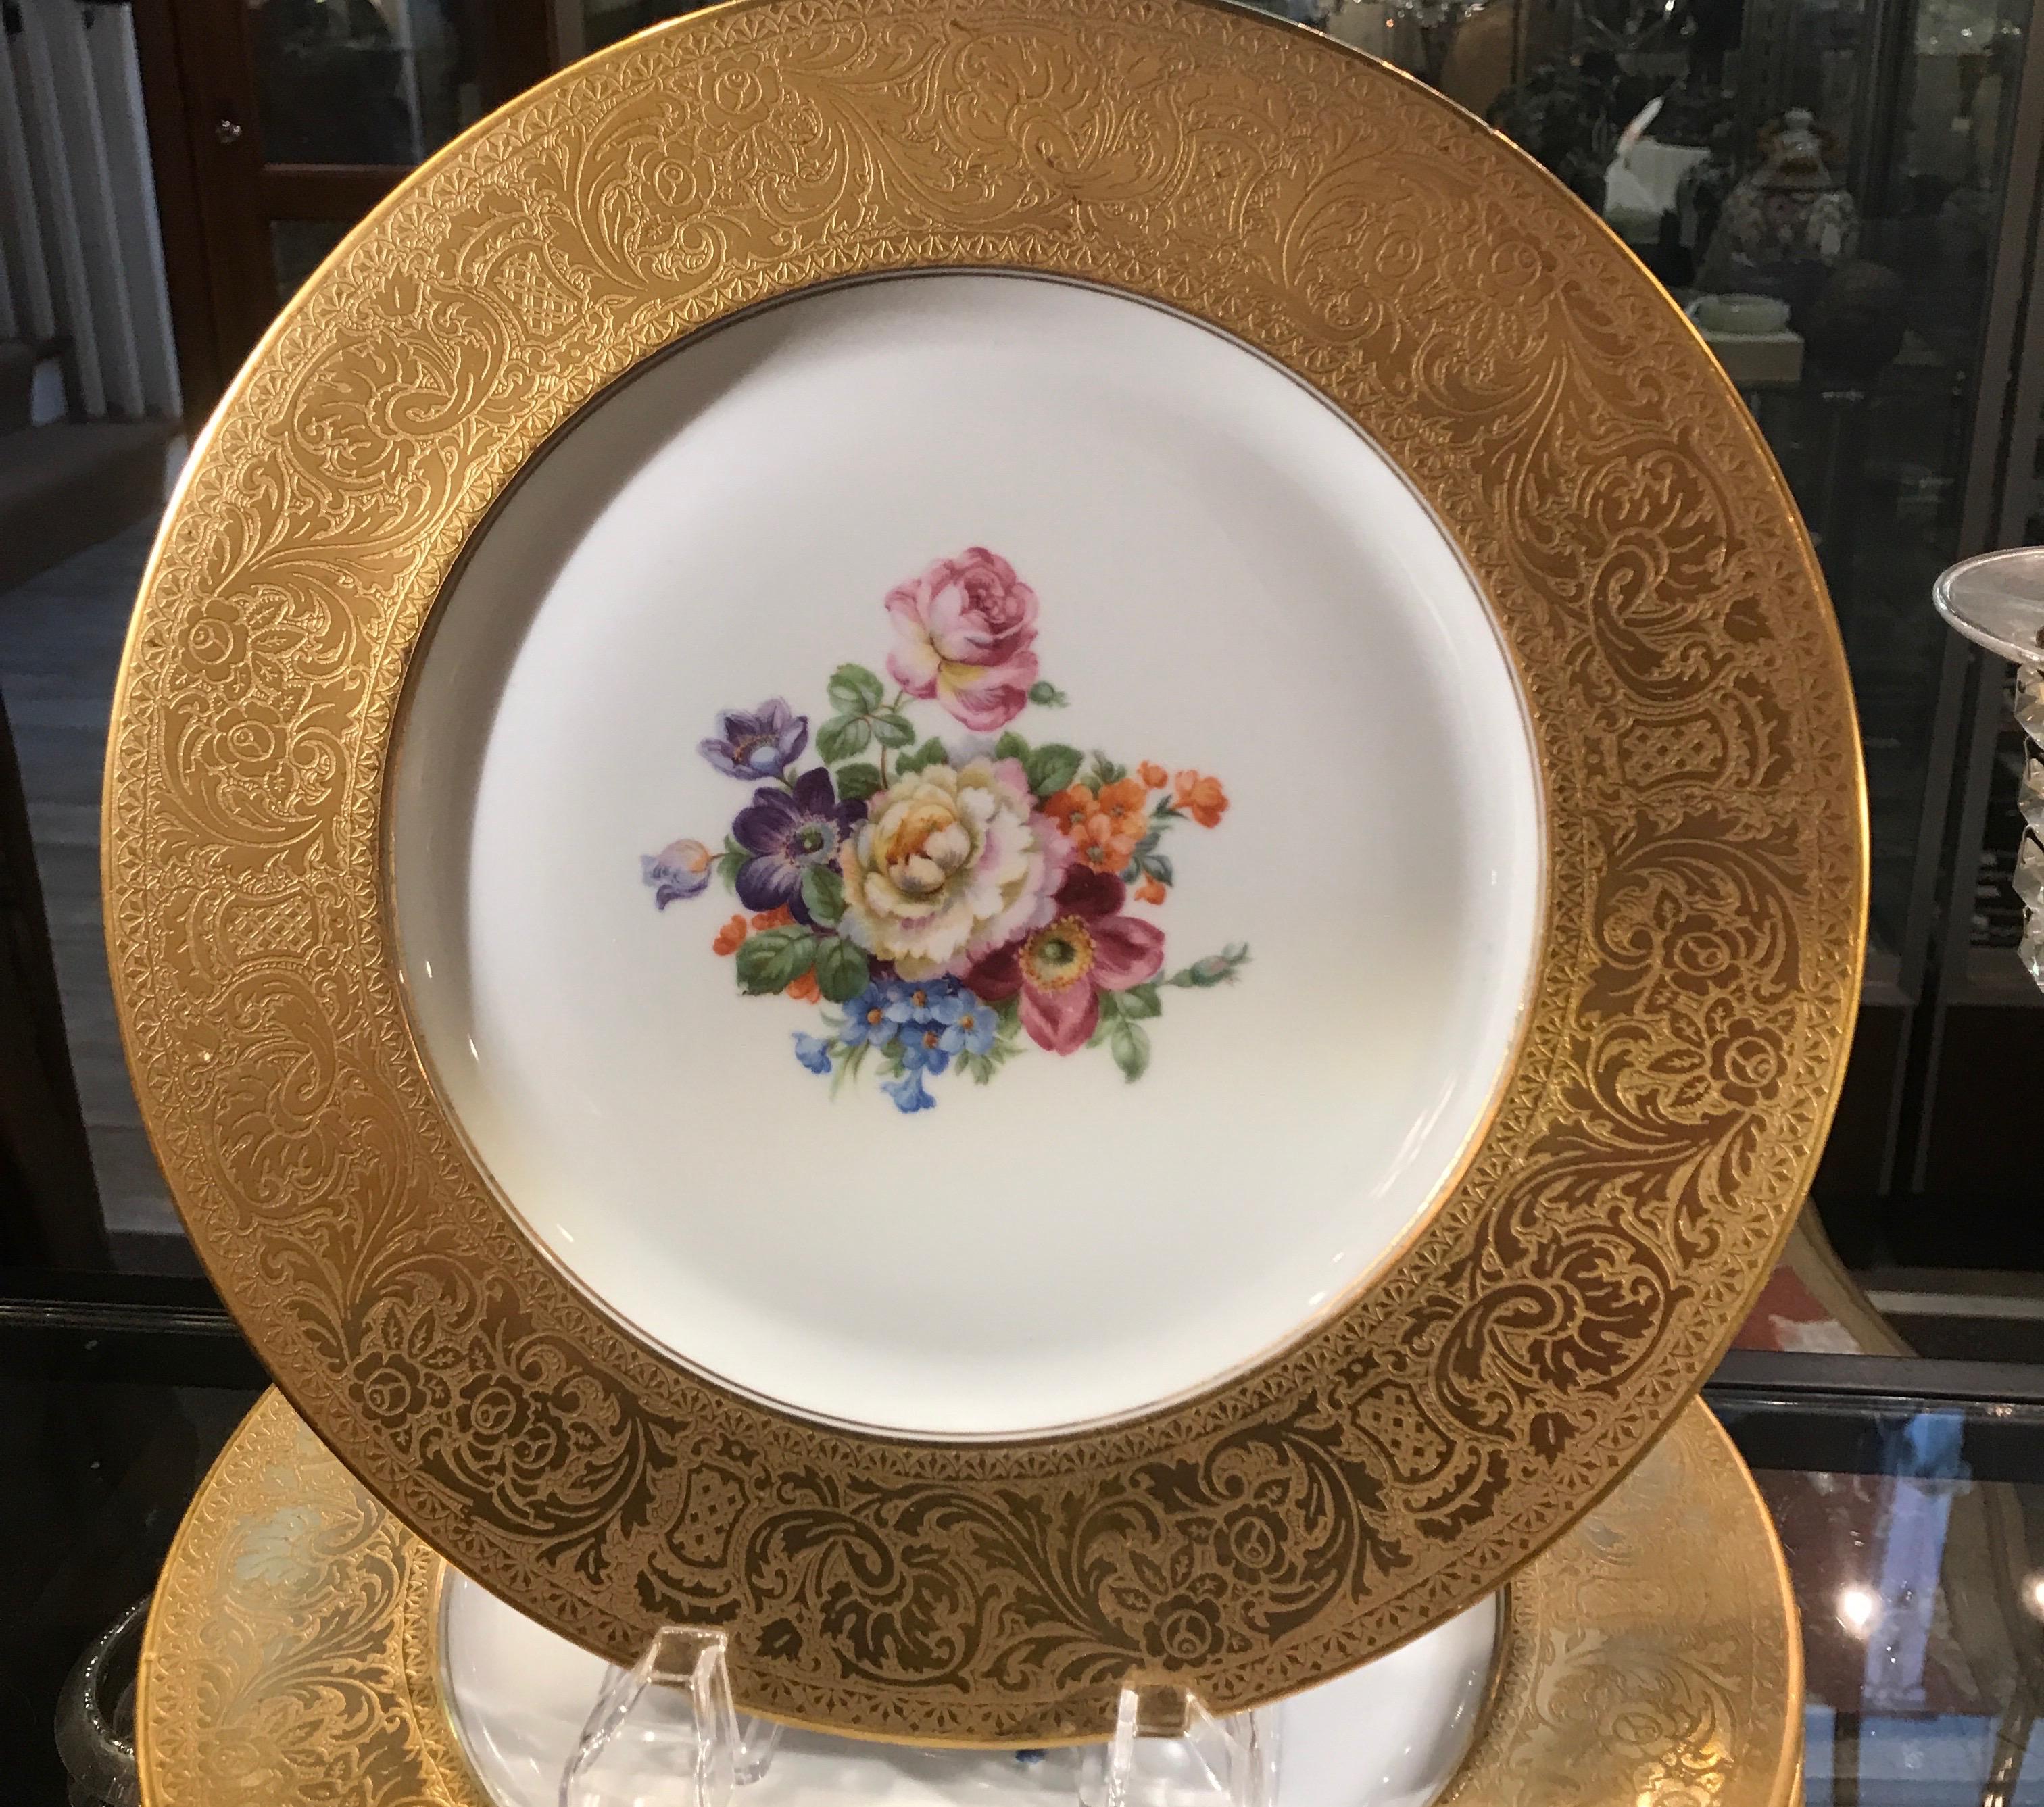 12 Heinrich and Co elegant service plates with thick gold borders and Dresden style floral centers, Early to mid 20th century, Germany.